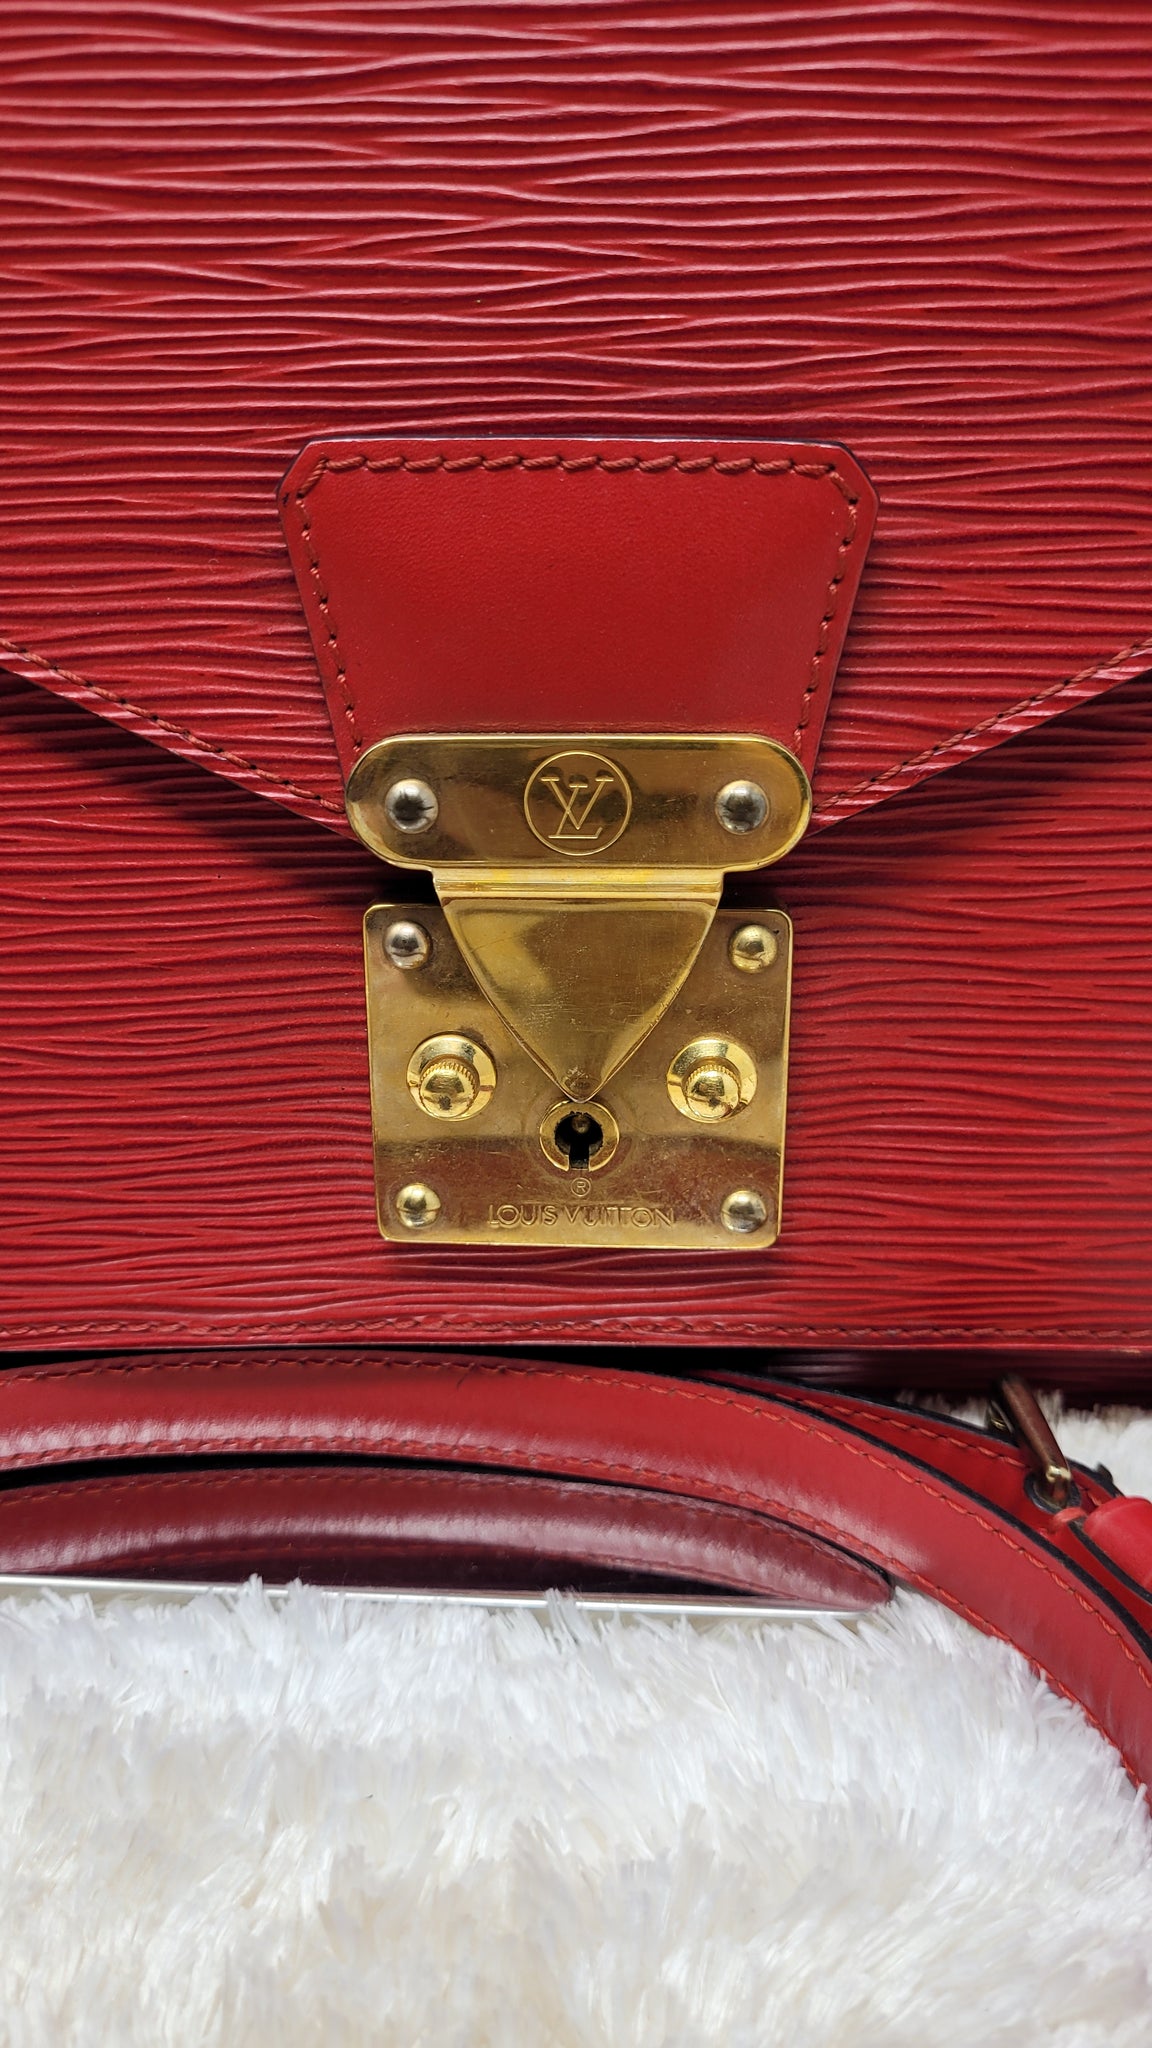 Louis Vuitton Epi Monceau  In the Collection 